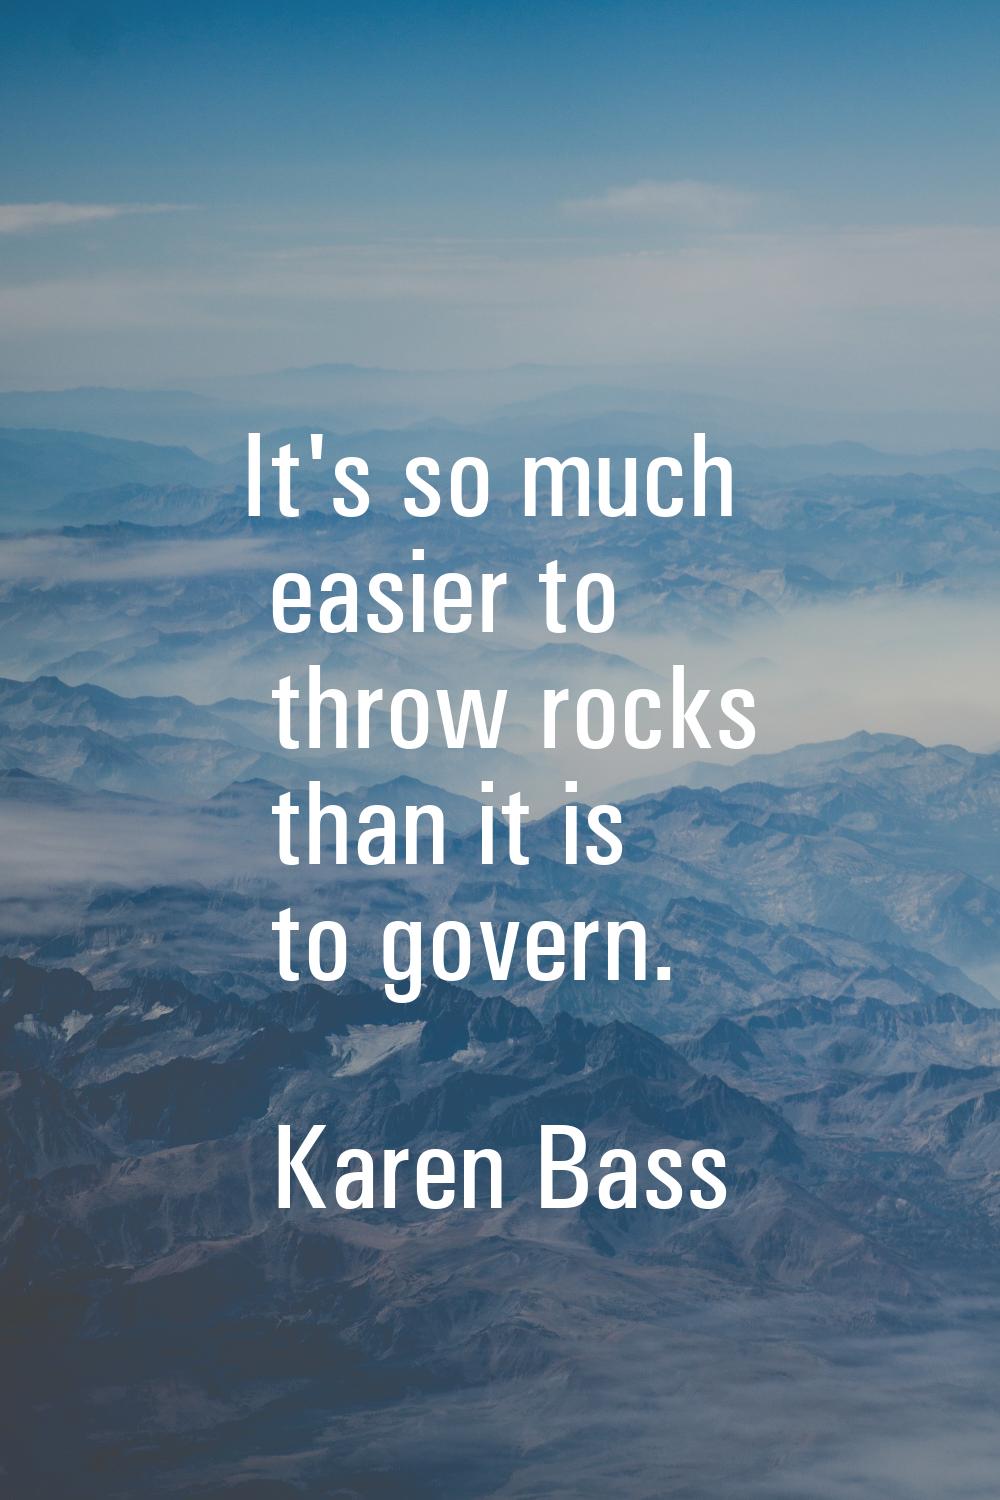 It's so much easier to throw rocks than it is to govern.